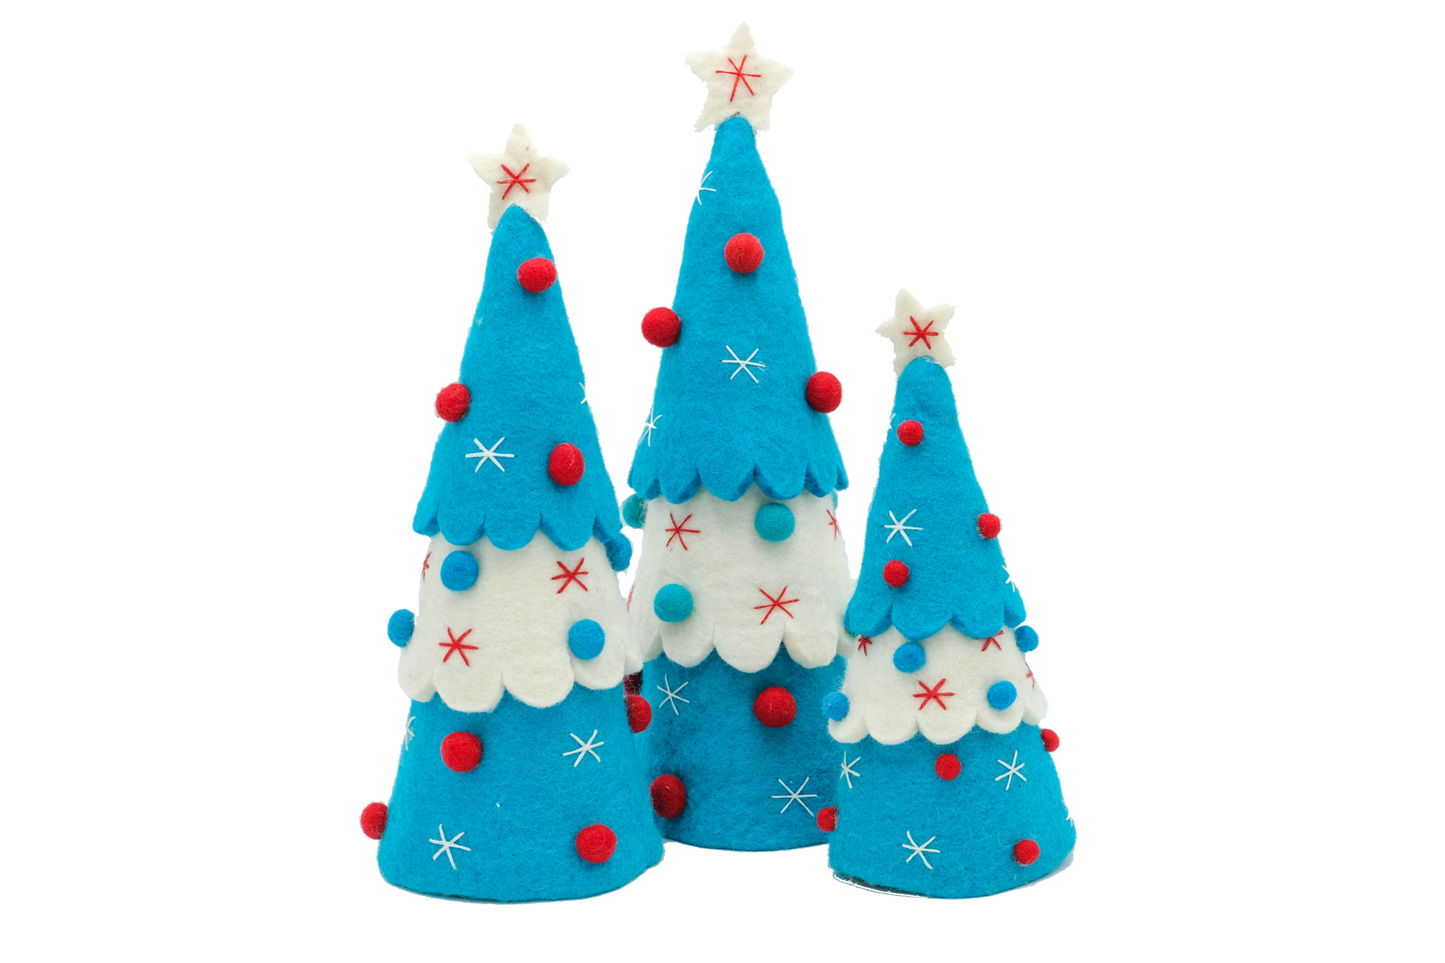 This Global Groove Life, handmade, ethical, fair trade, eco-friendly, sustainable, turquoise, white and red felt tabletop Christmas tree set was created by artisans in Kathmandu Nepal and will bring colorful warmth and fun to your home this season.